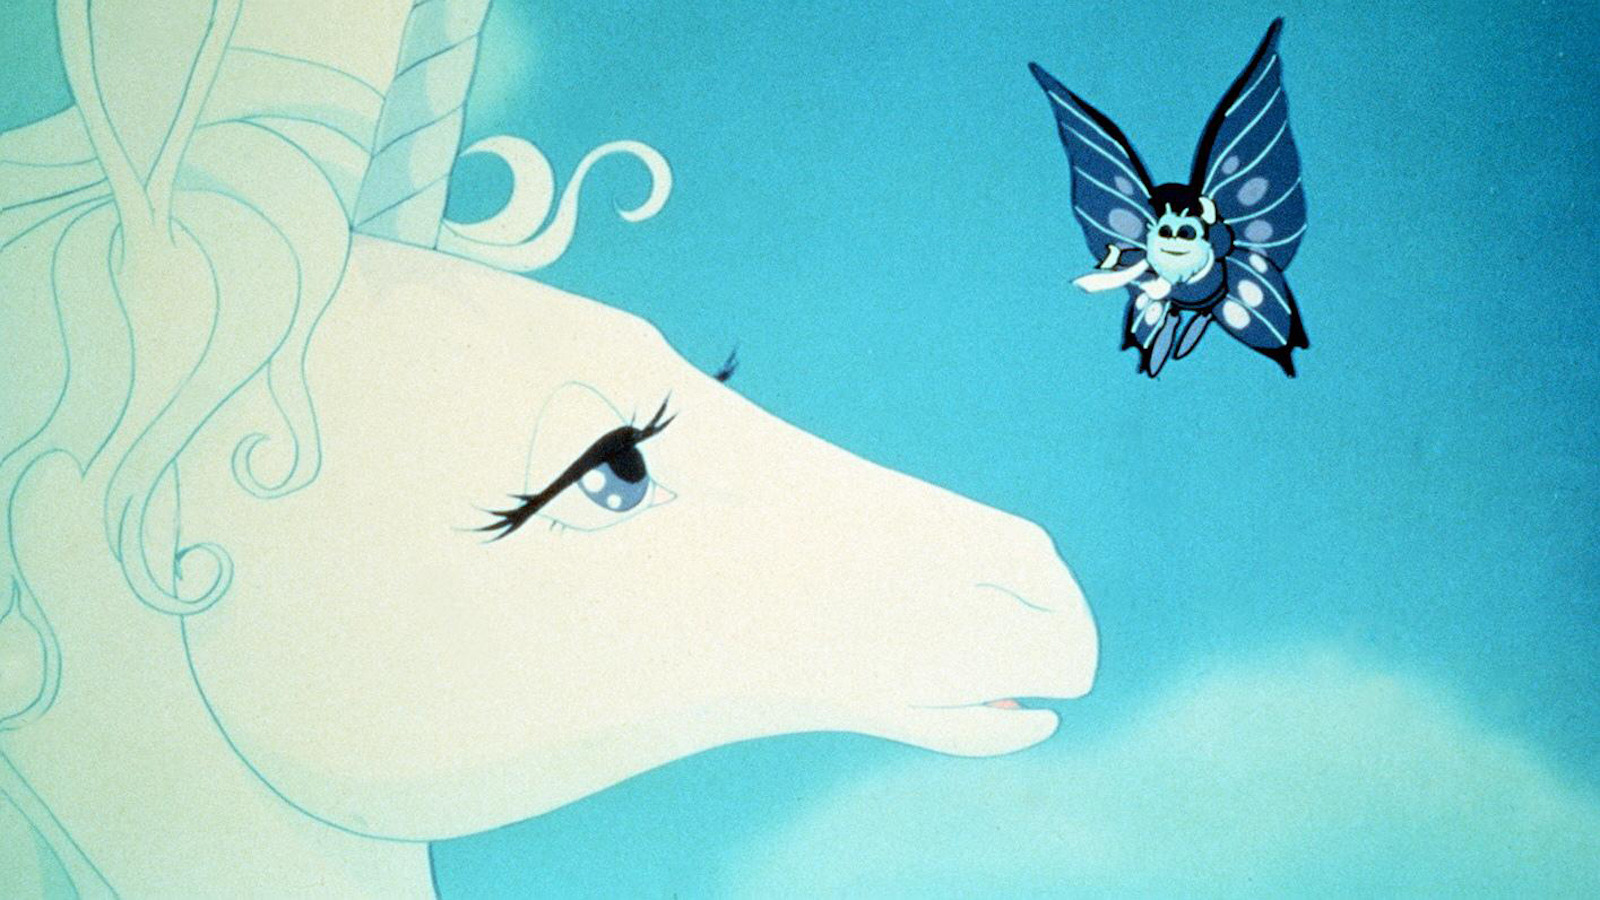 They Don't Make Kids' Movies As Weird As The Last Unicorn Anymore